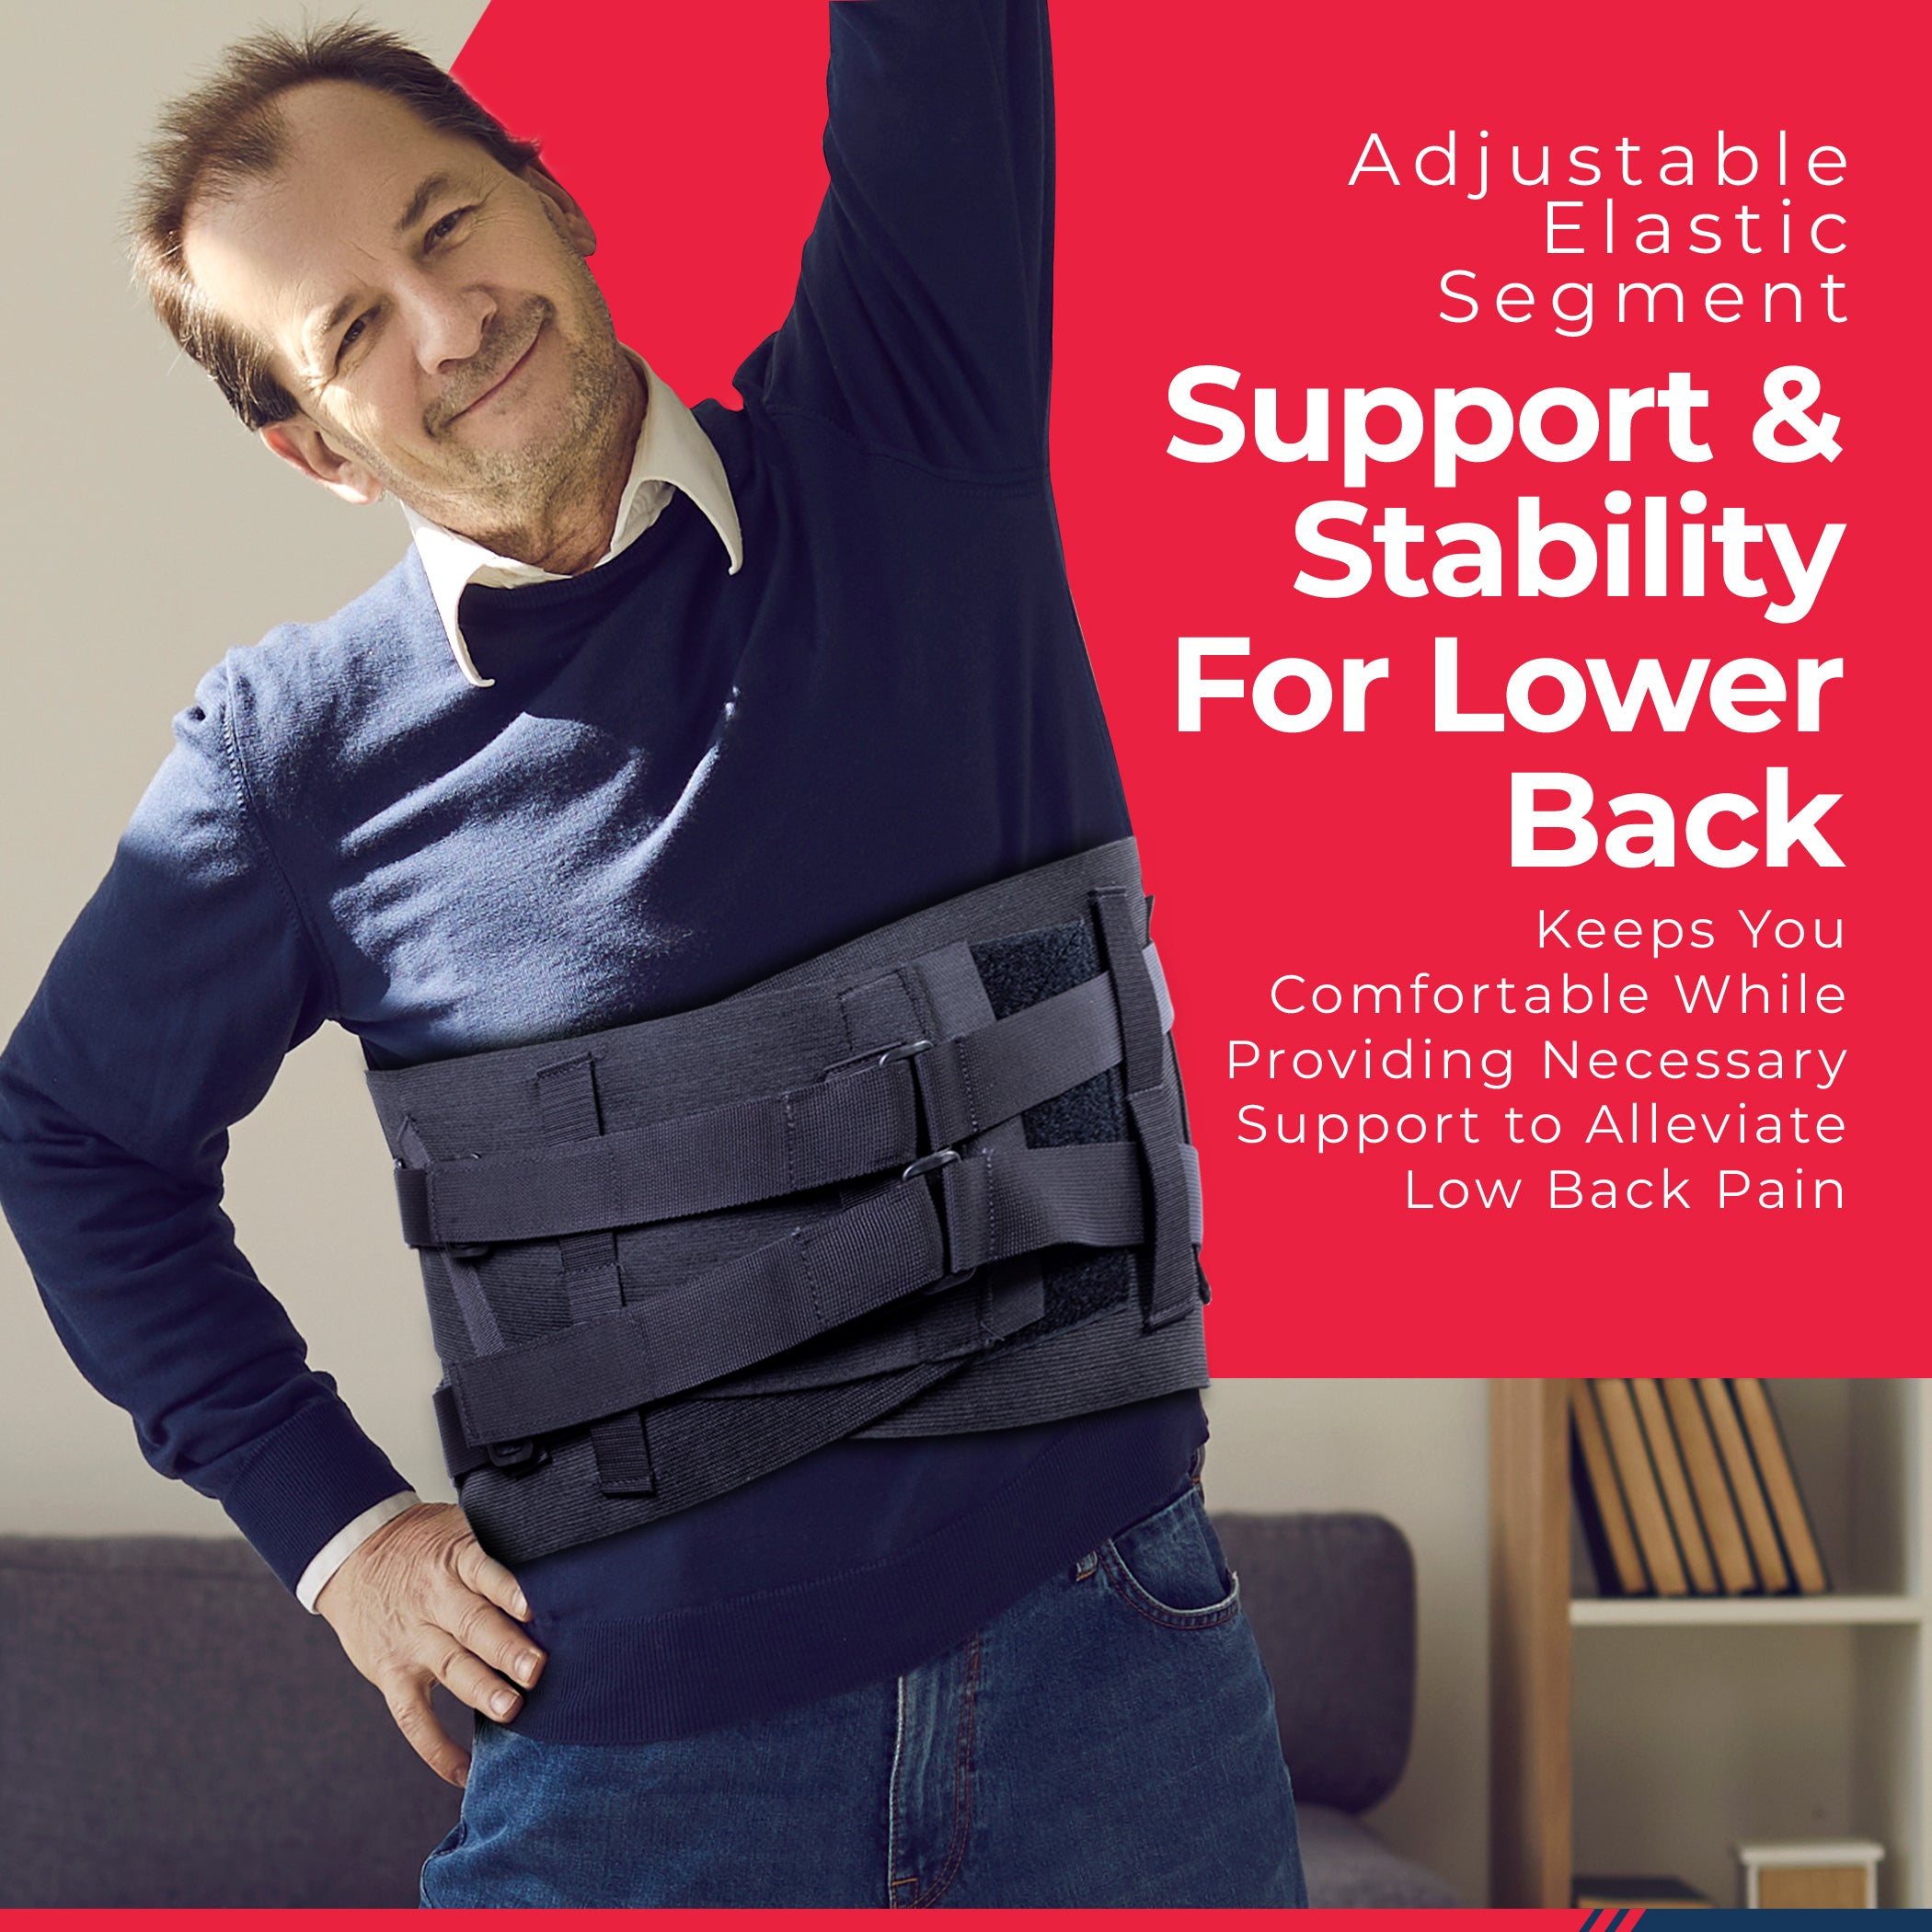  ZCY Lumbar Supports Unisex Lumbar Orthopedic Corset Herniated  Disc Brace Fajas Ortopedicas Lower Back Support Corset On The Lumbar Spine  Back Belt LS (Color : Black, Size : XL) : Health